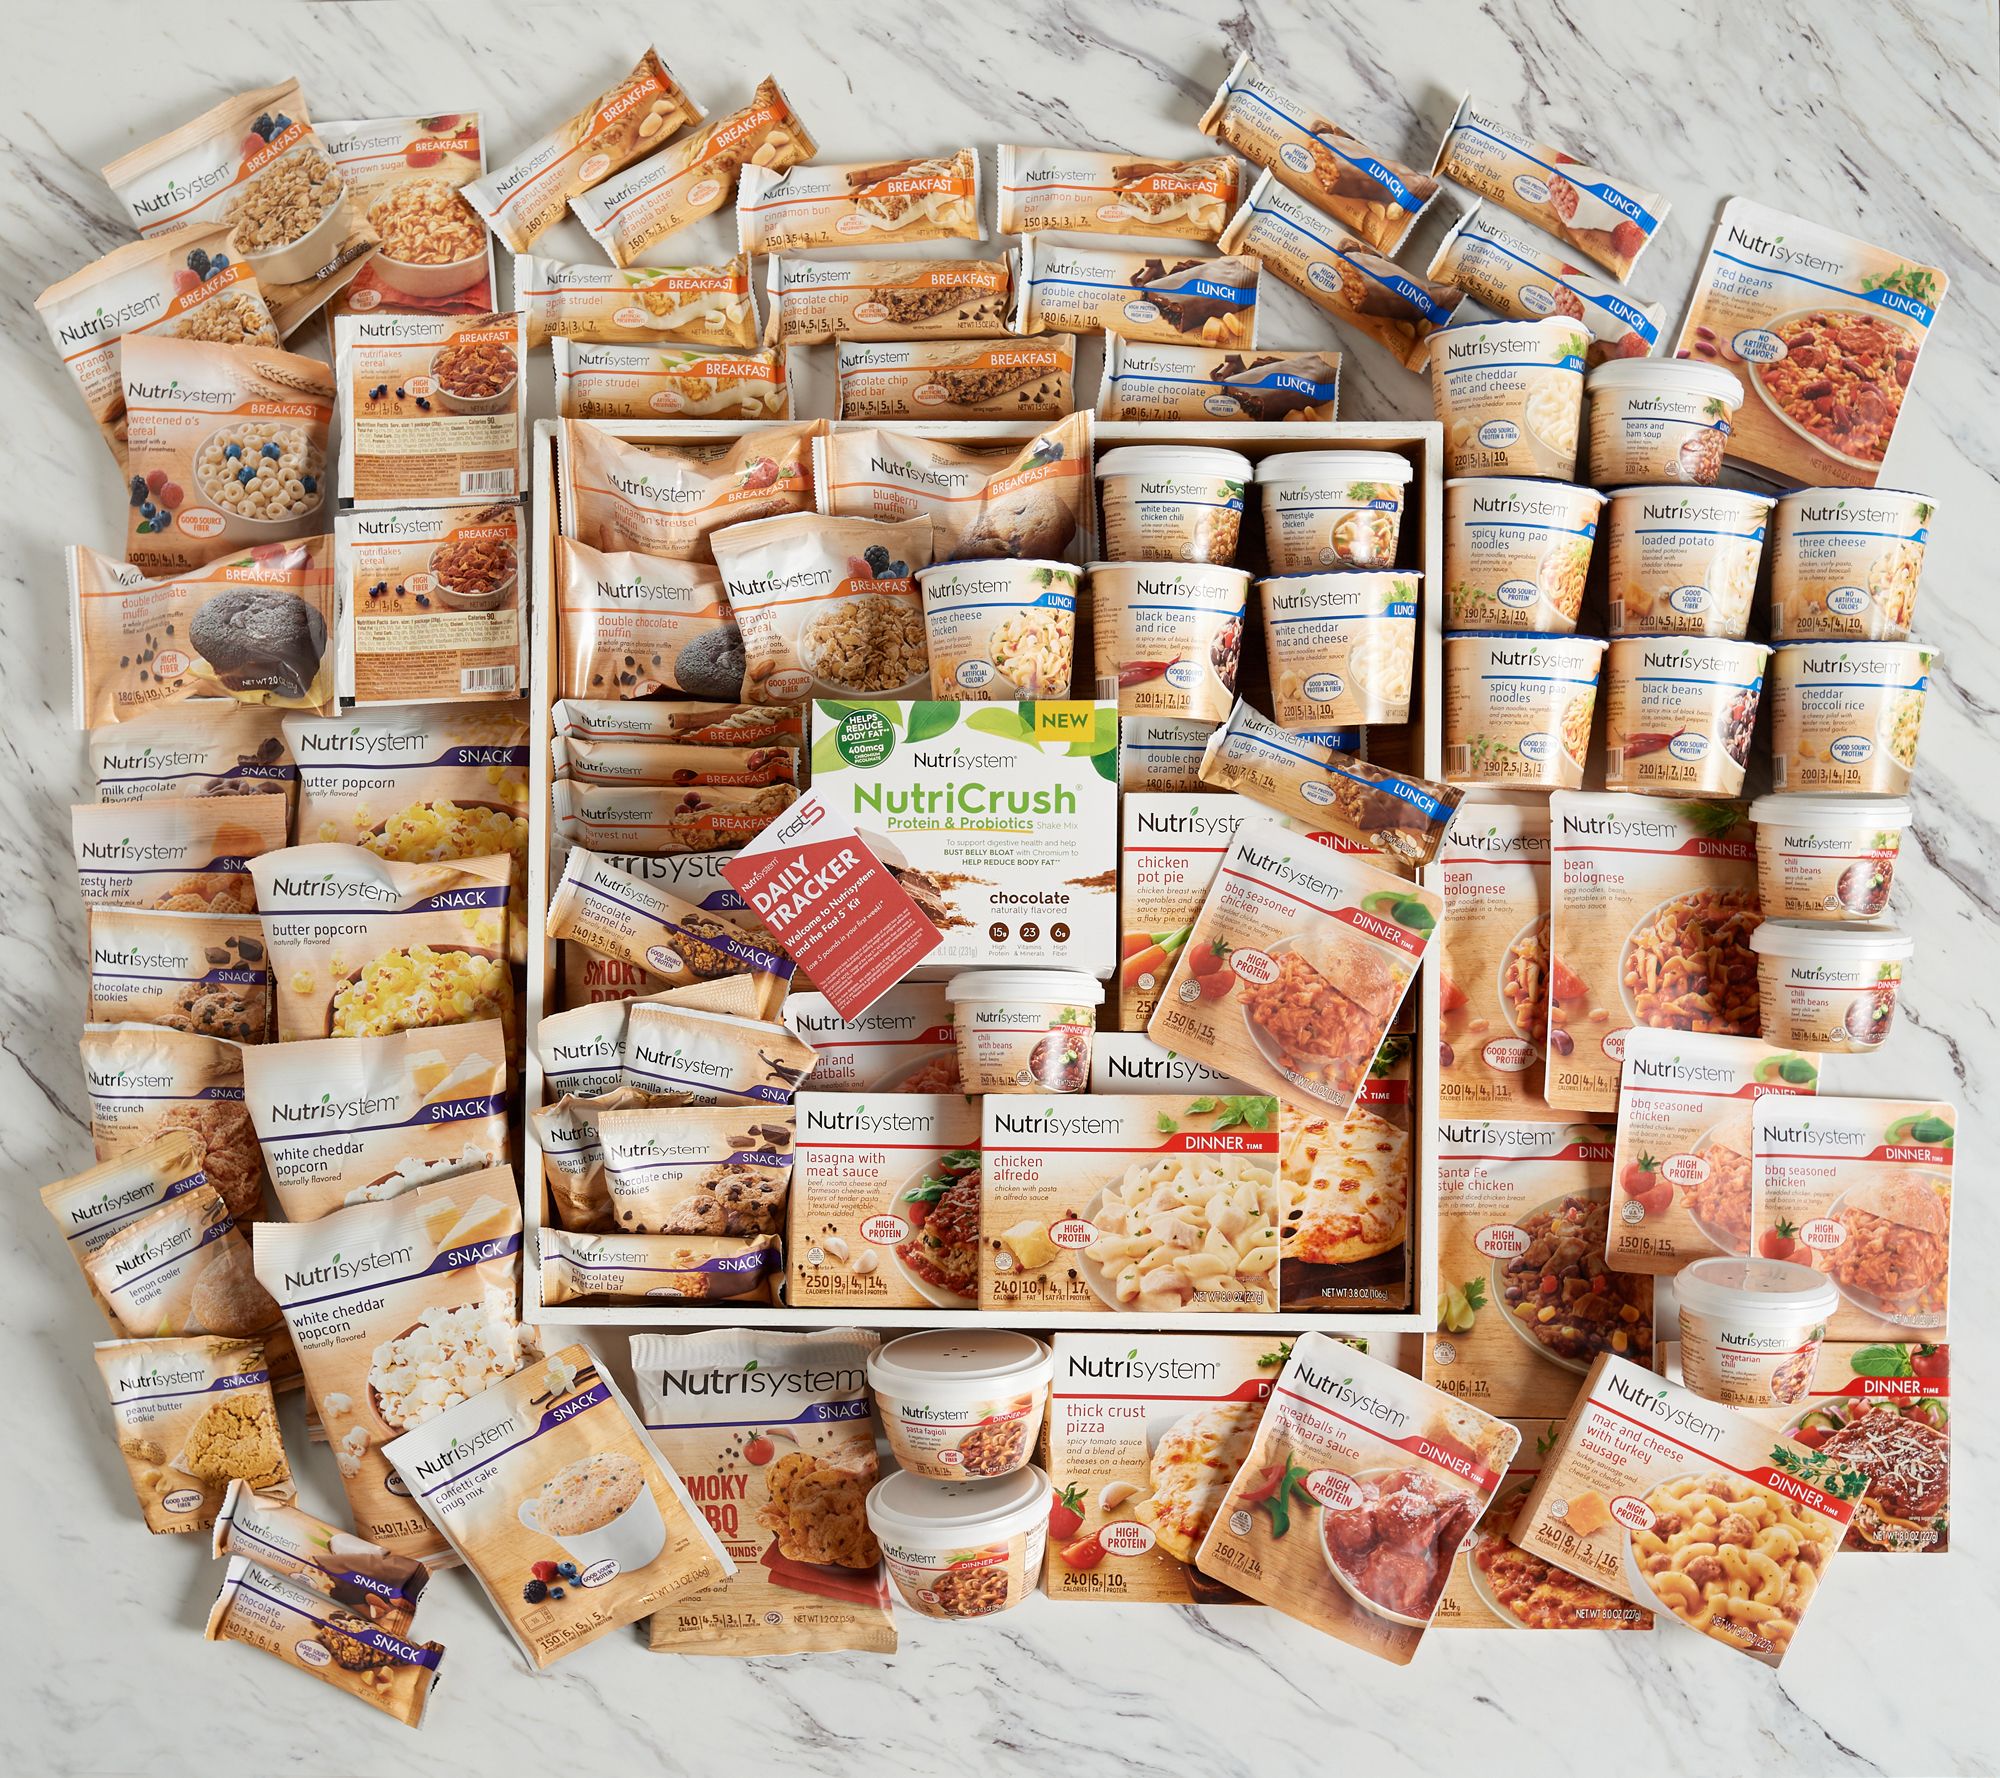 Everything You Need to Know About the Nutrisystem Diet